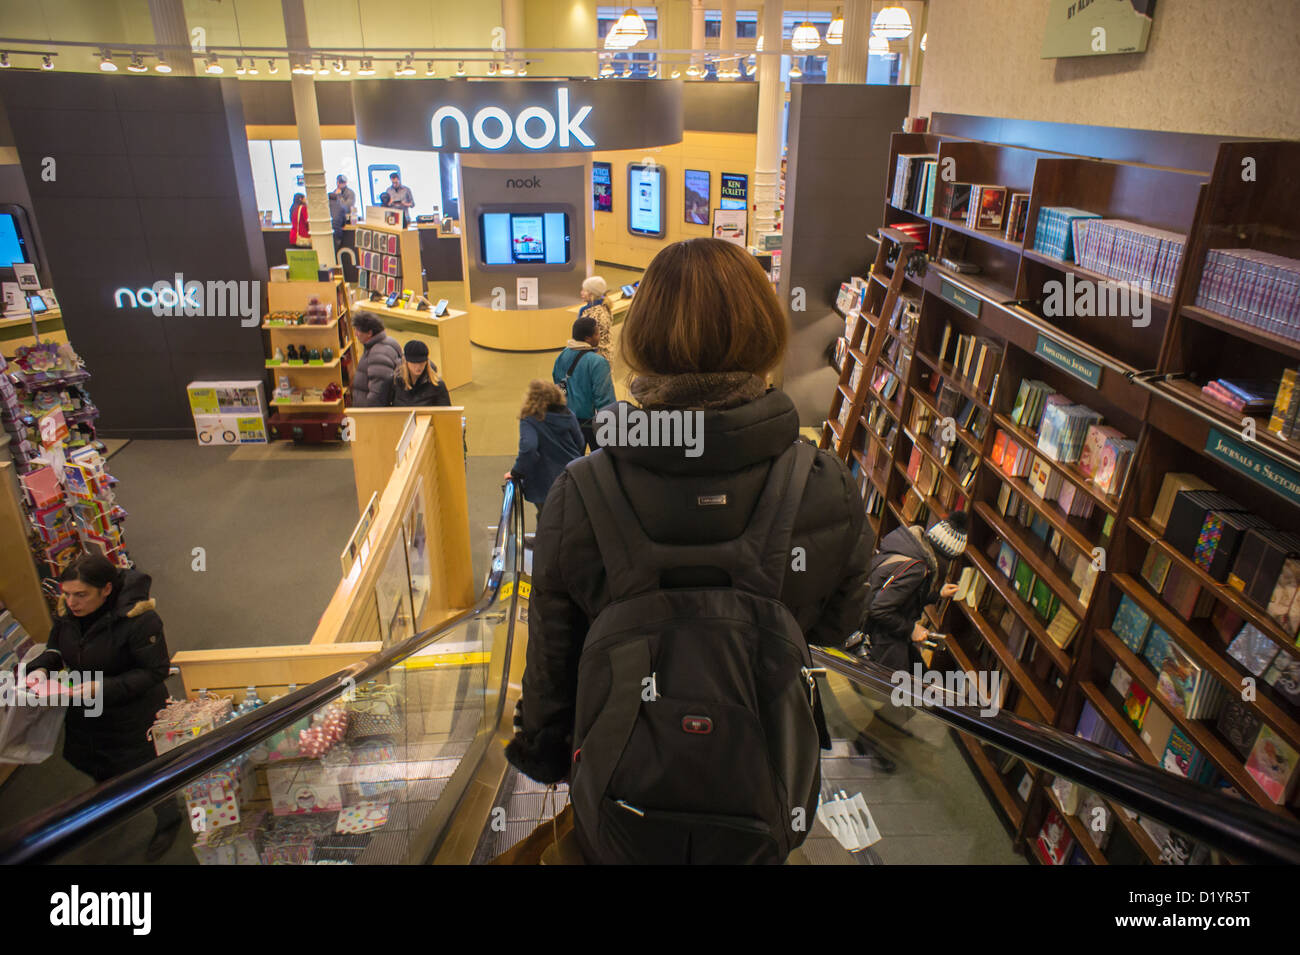 The Nook department in a Barnes & Noble bookstore off of Union Square in New York Stock Photo